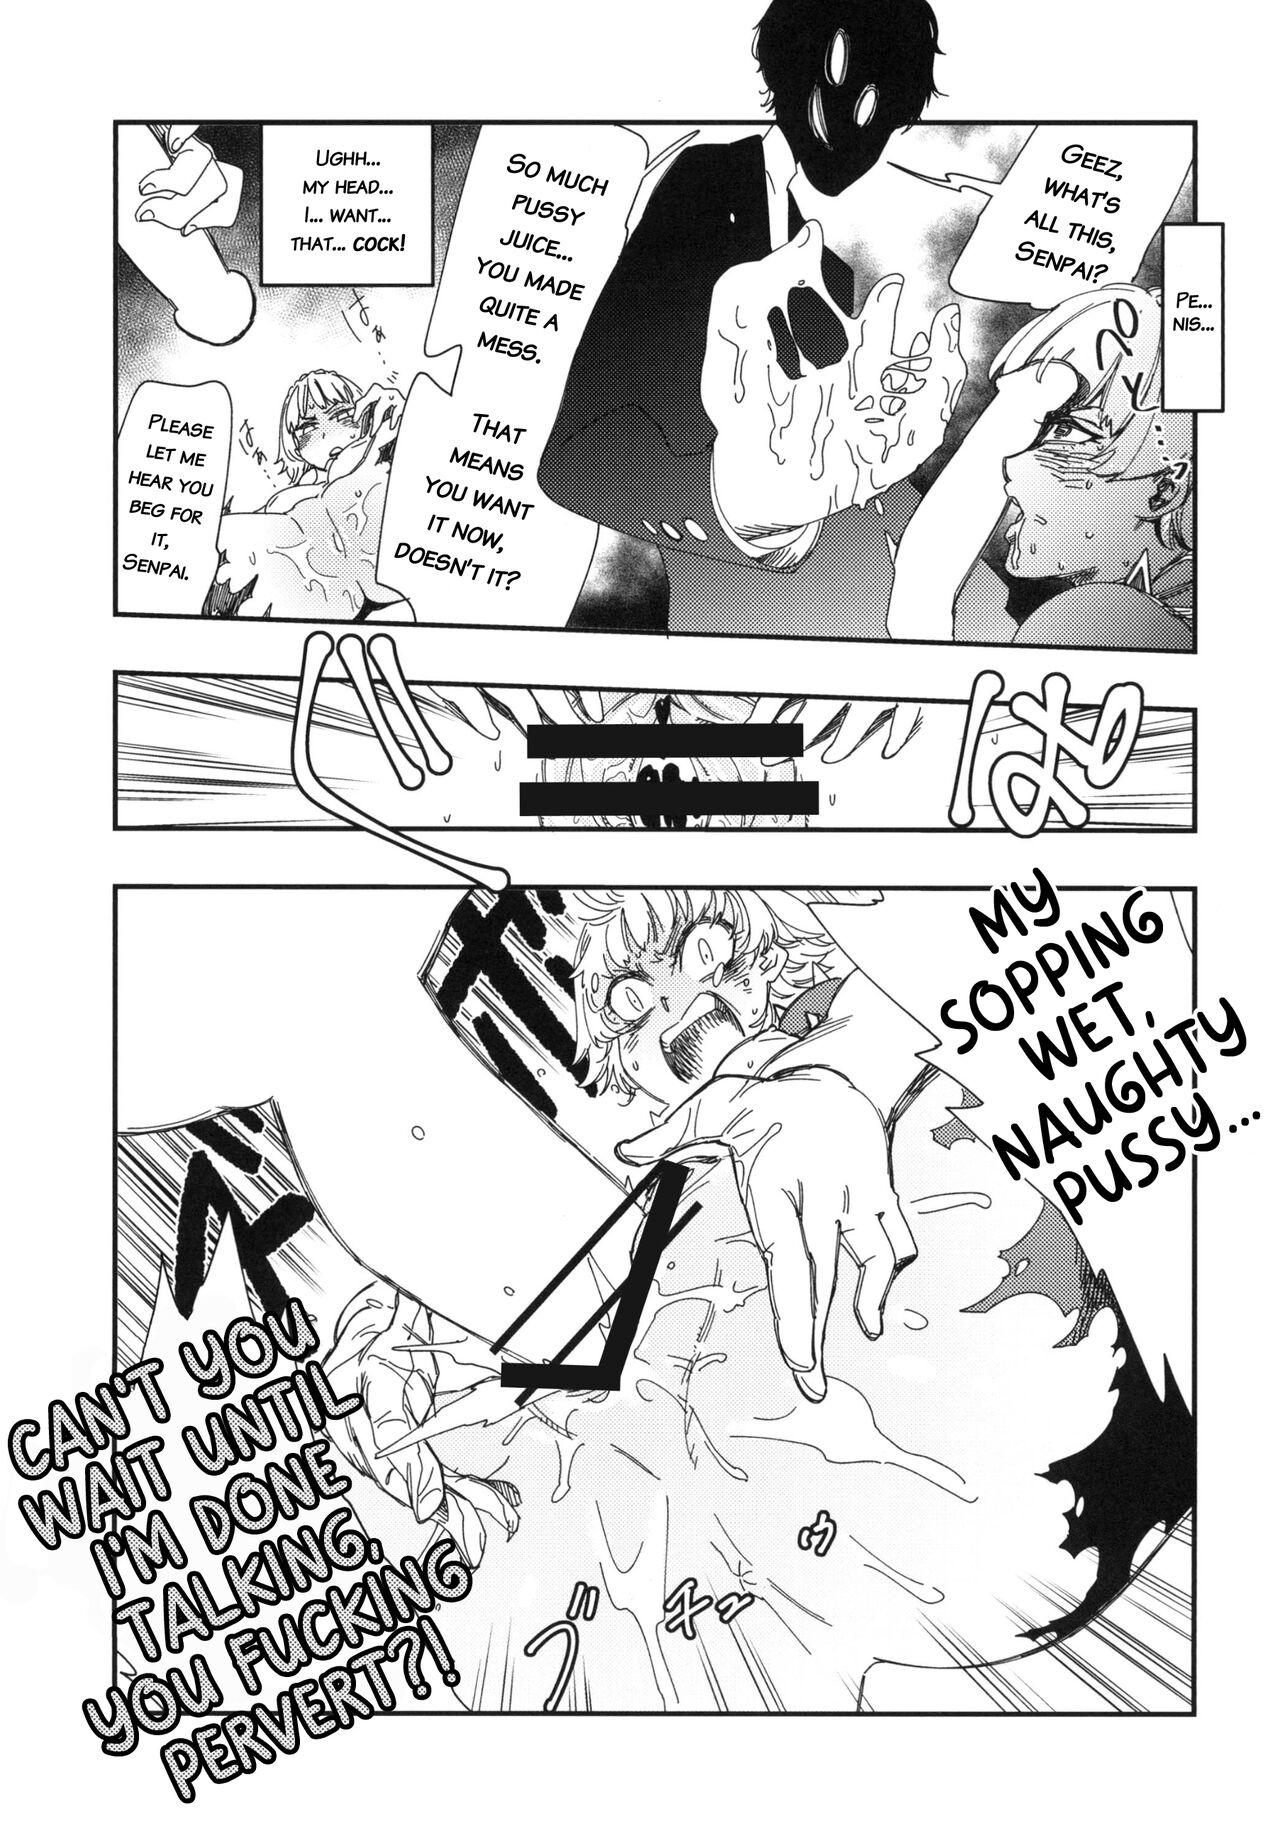 Mexico COFFEE & SPAM - Persona 5 Amature - Page 11